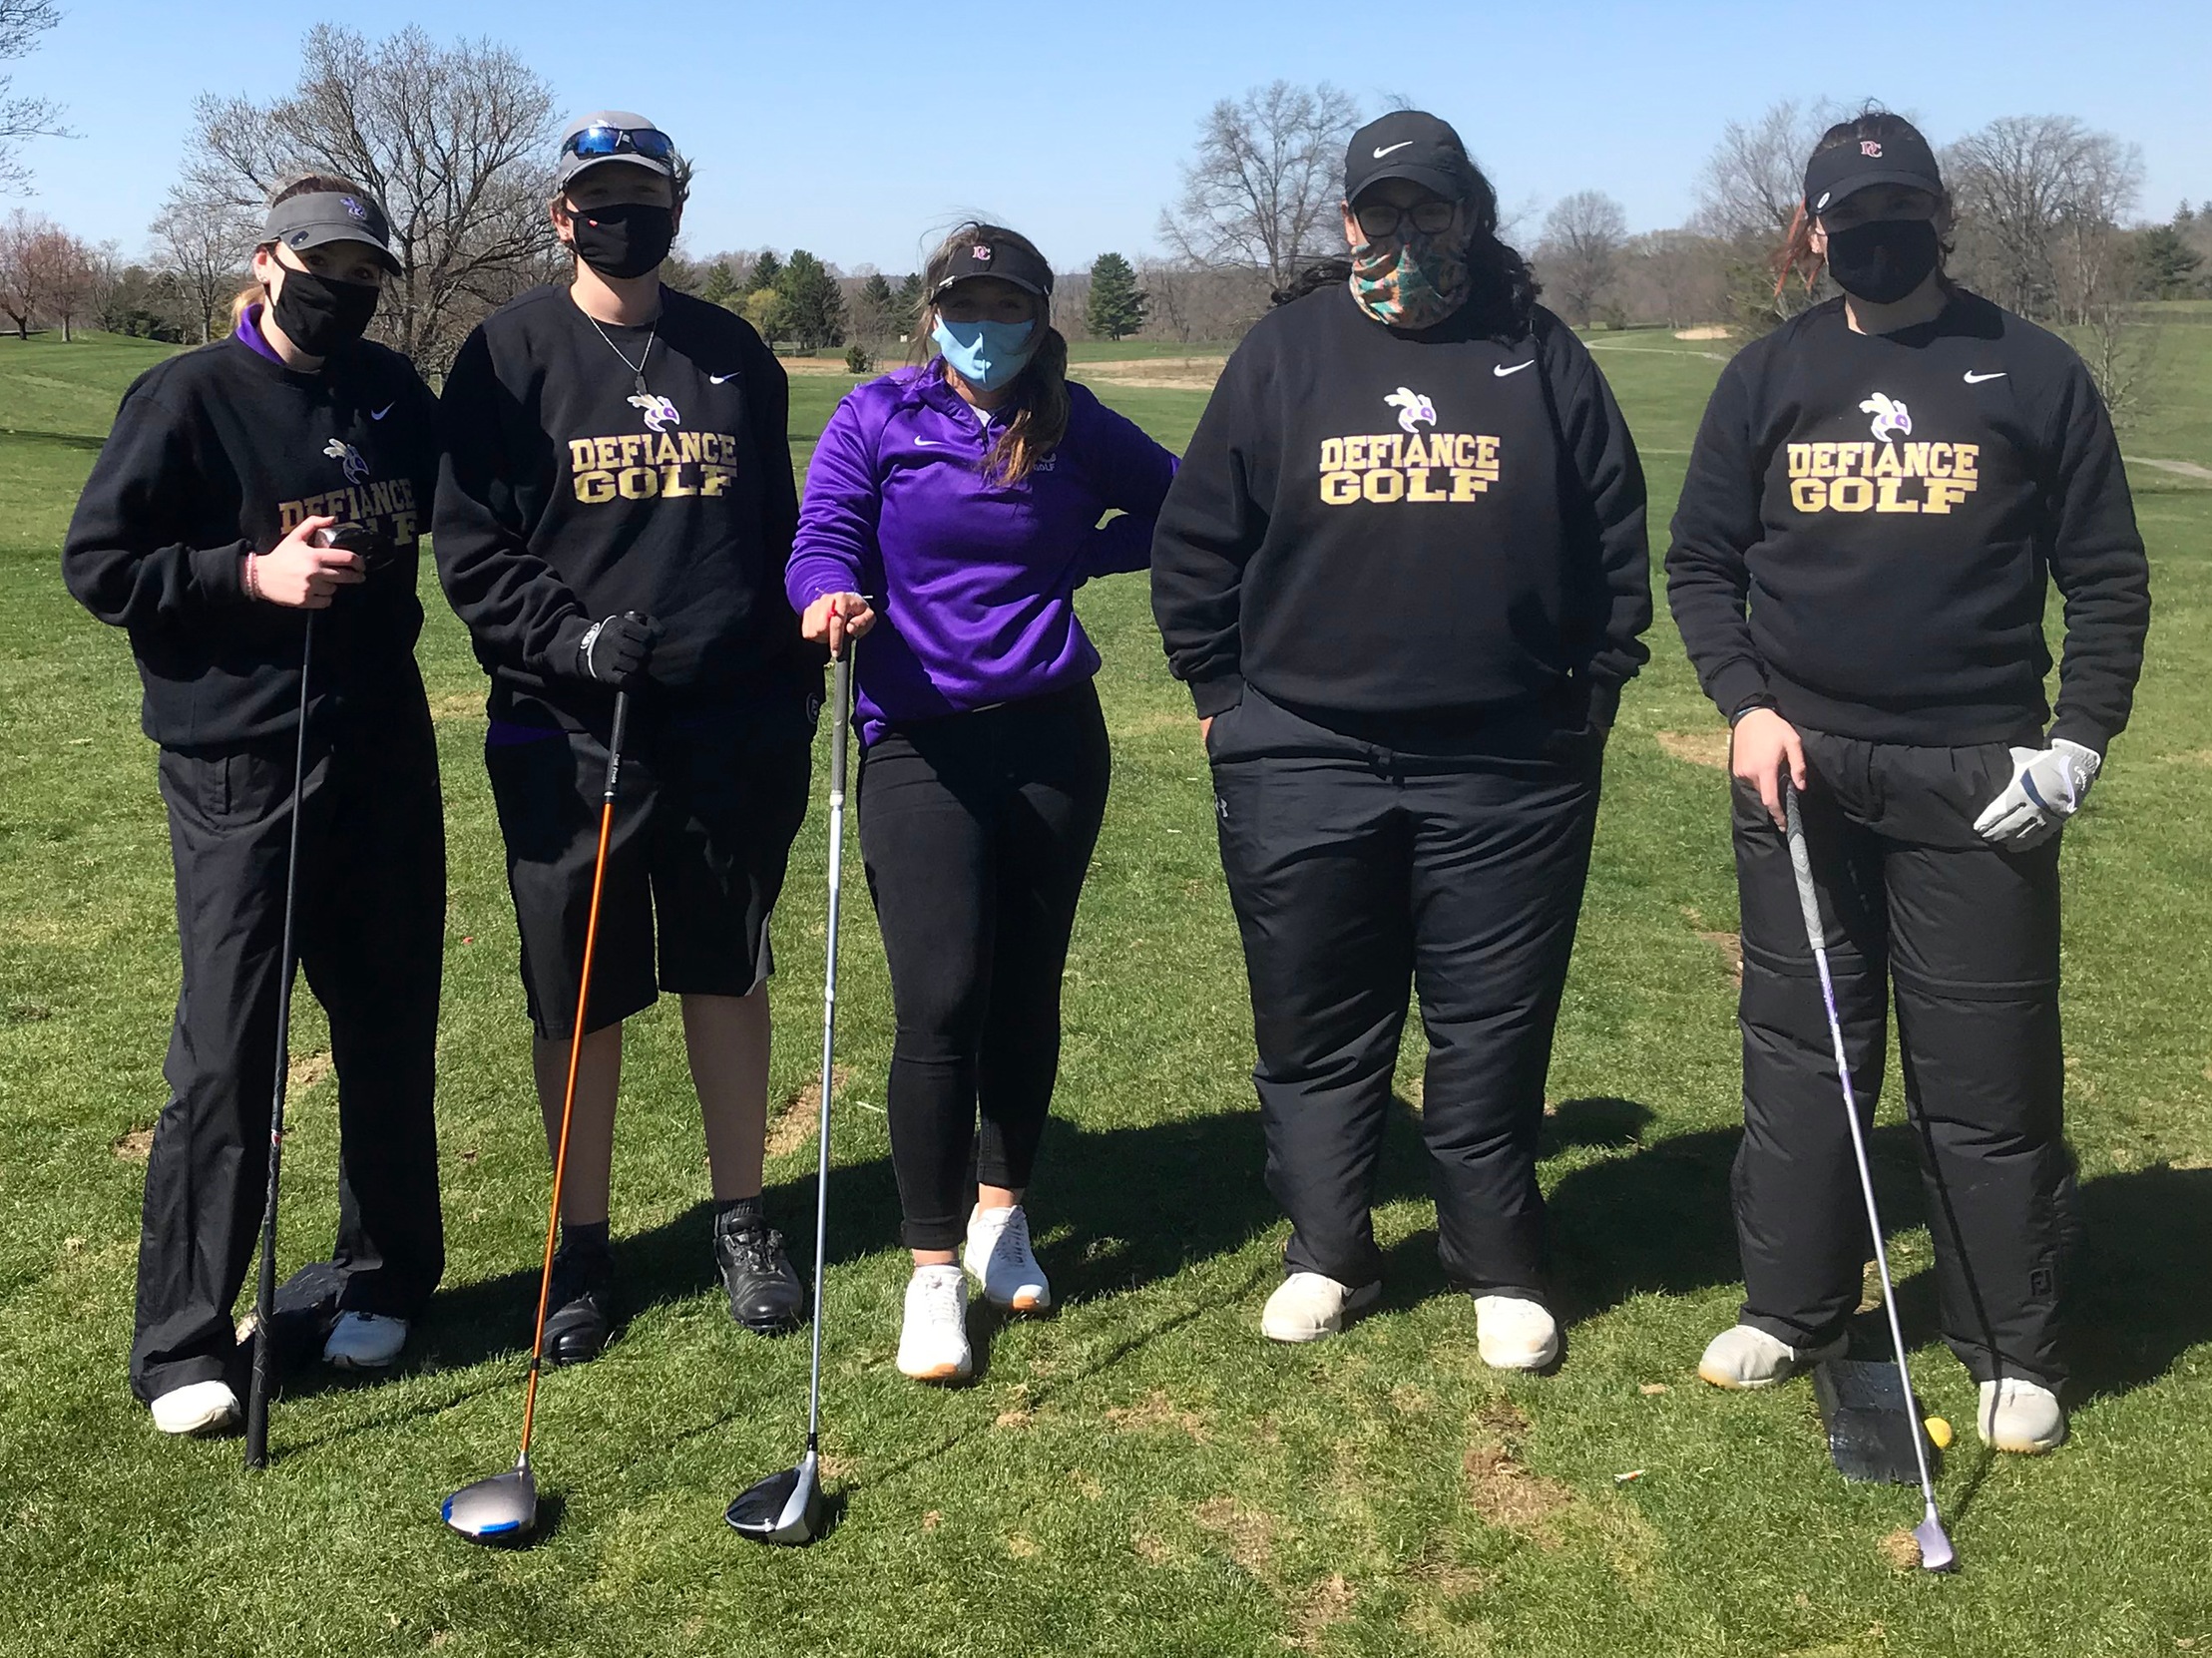 Women’s golf begins play in second tournament this spring